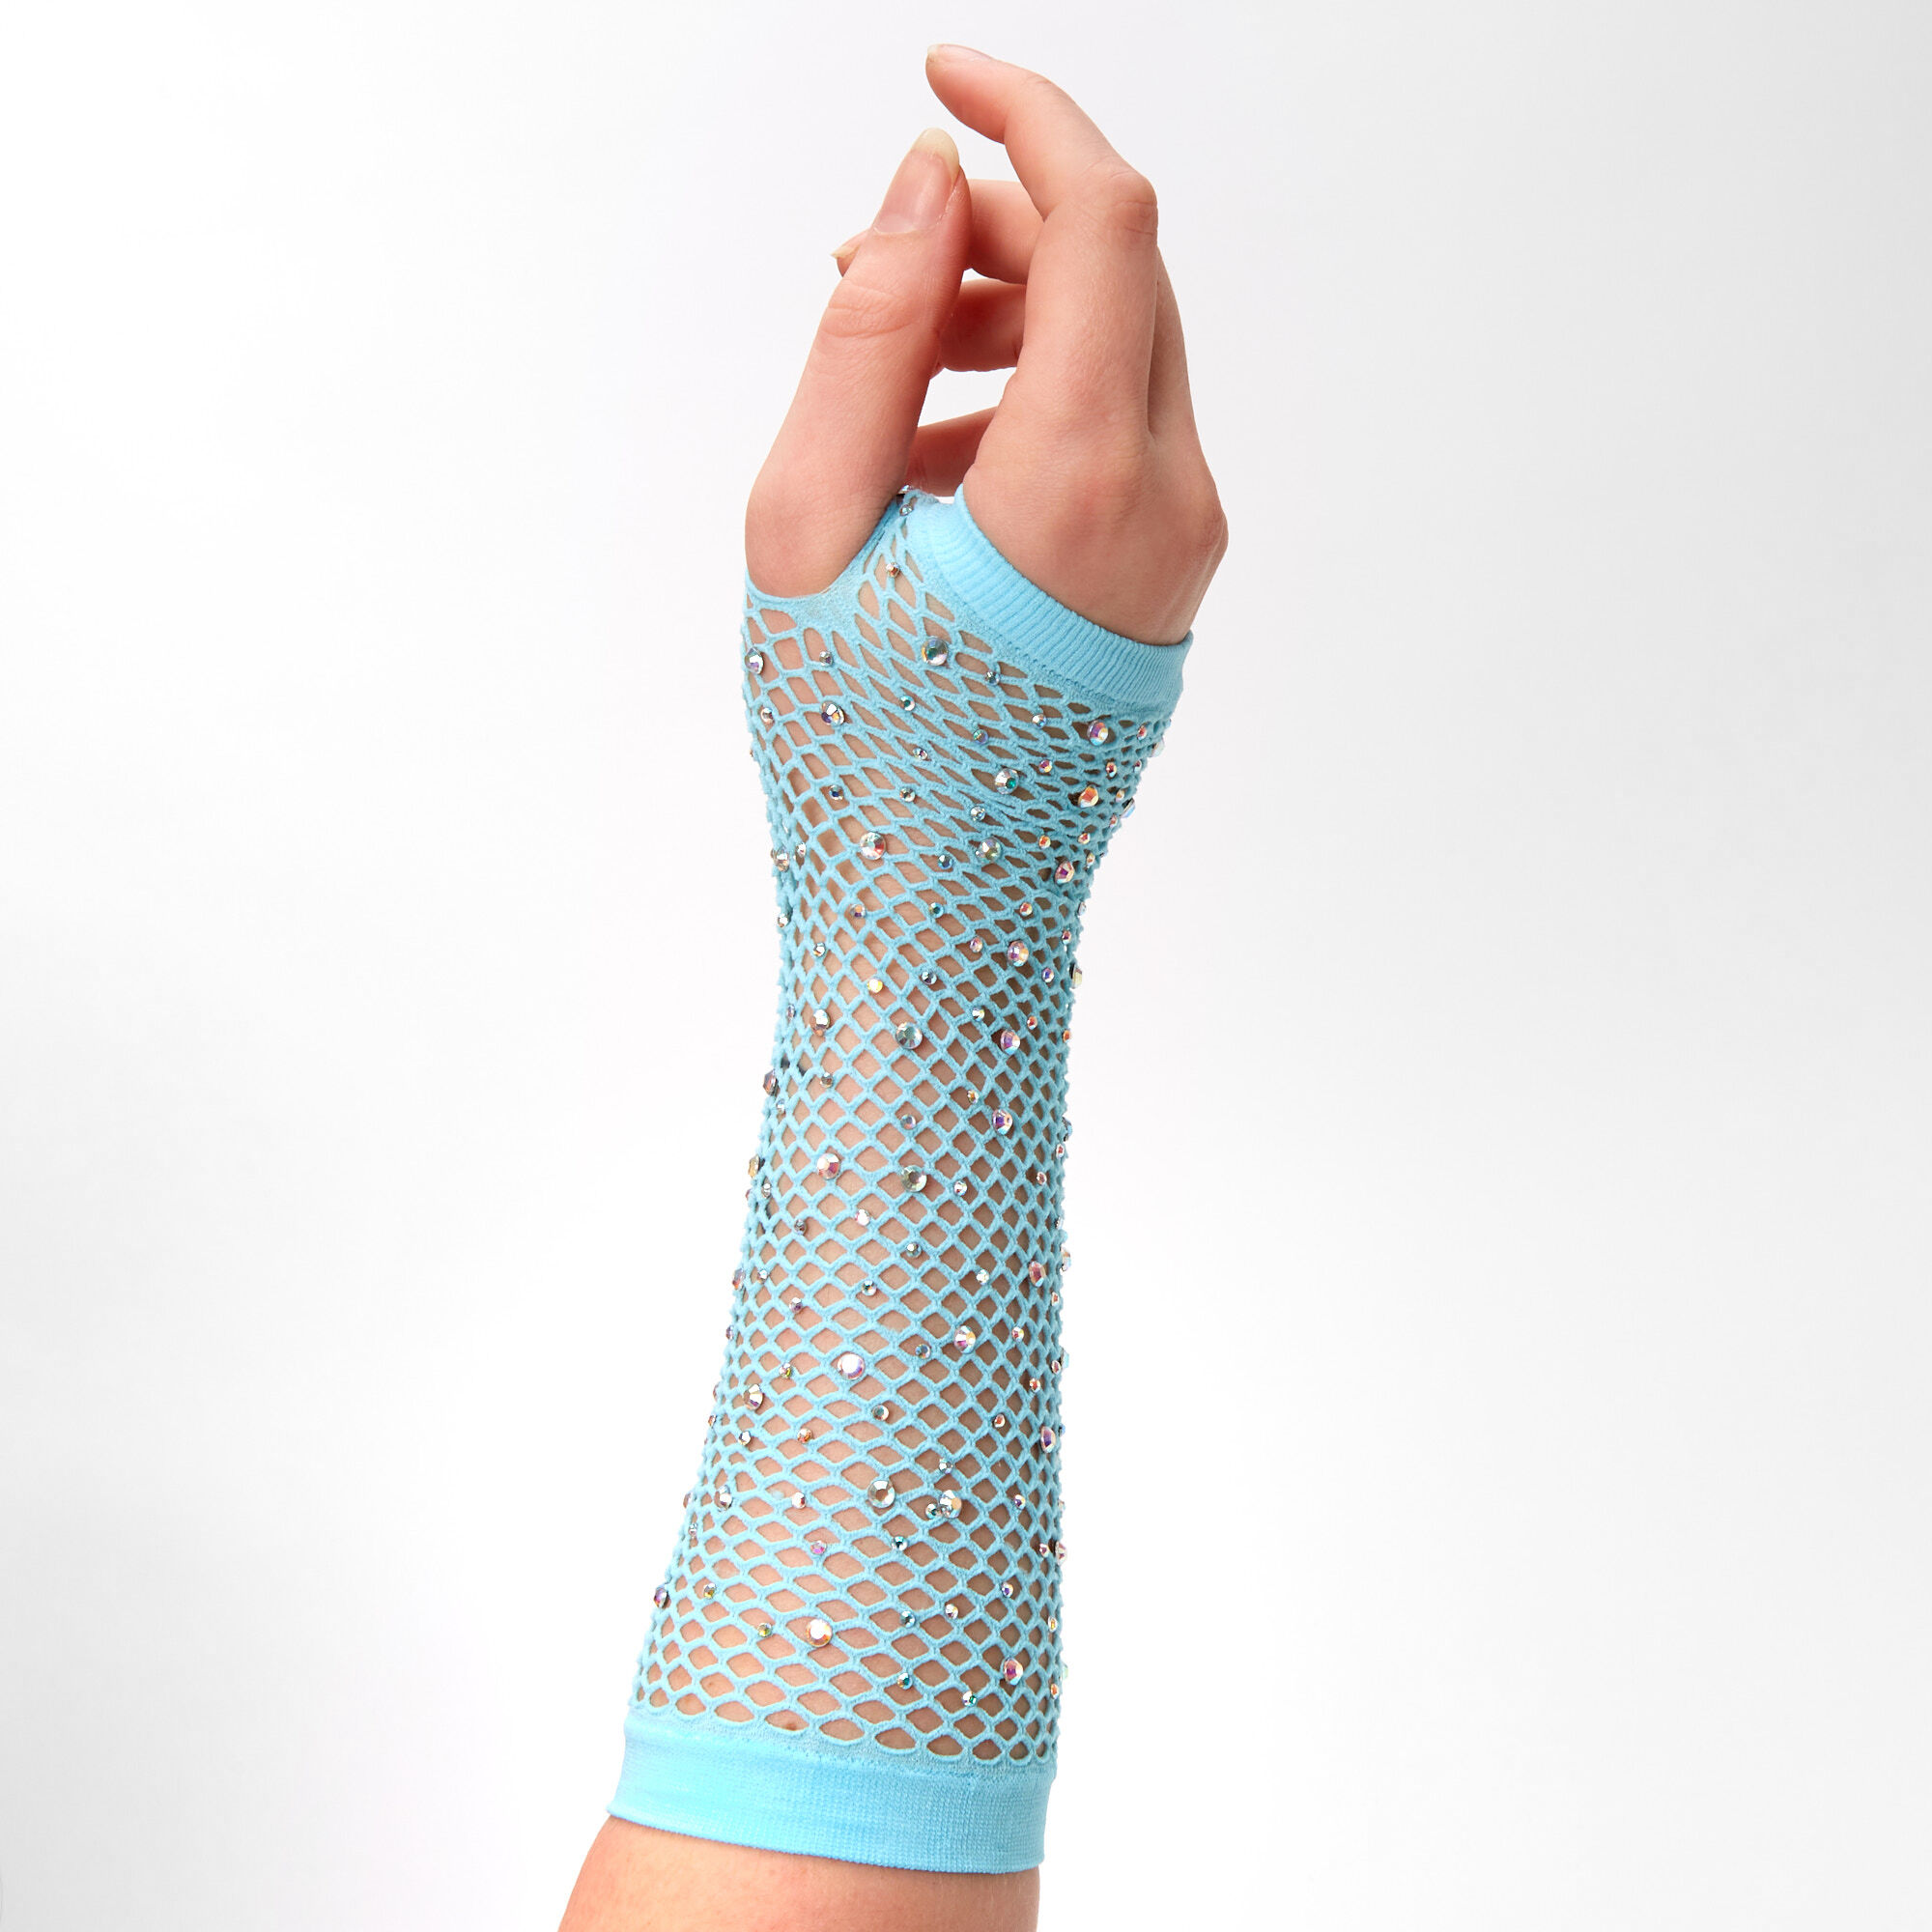 View Claires Rhinestone Fishnet Arm Warmers Blue information